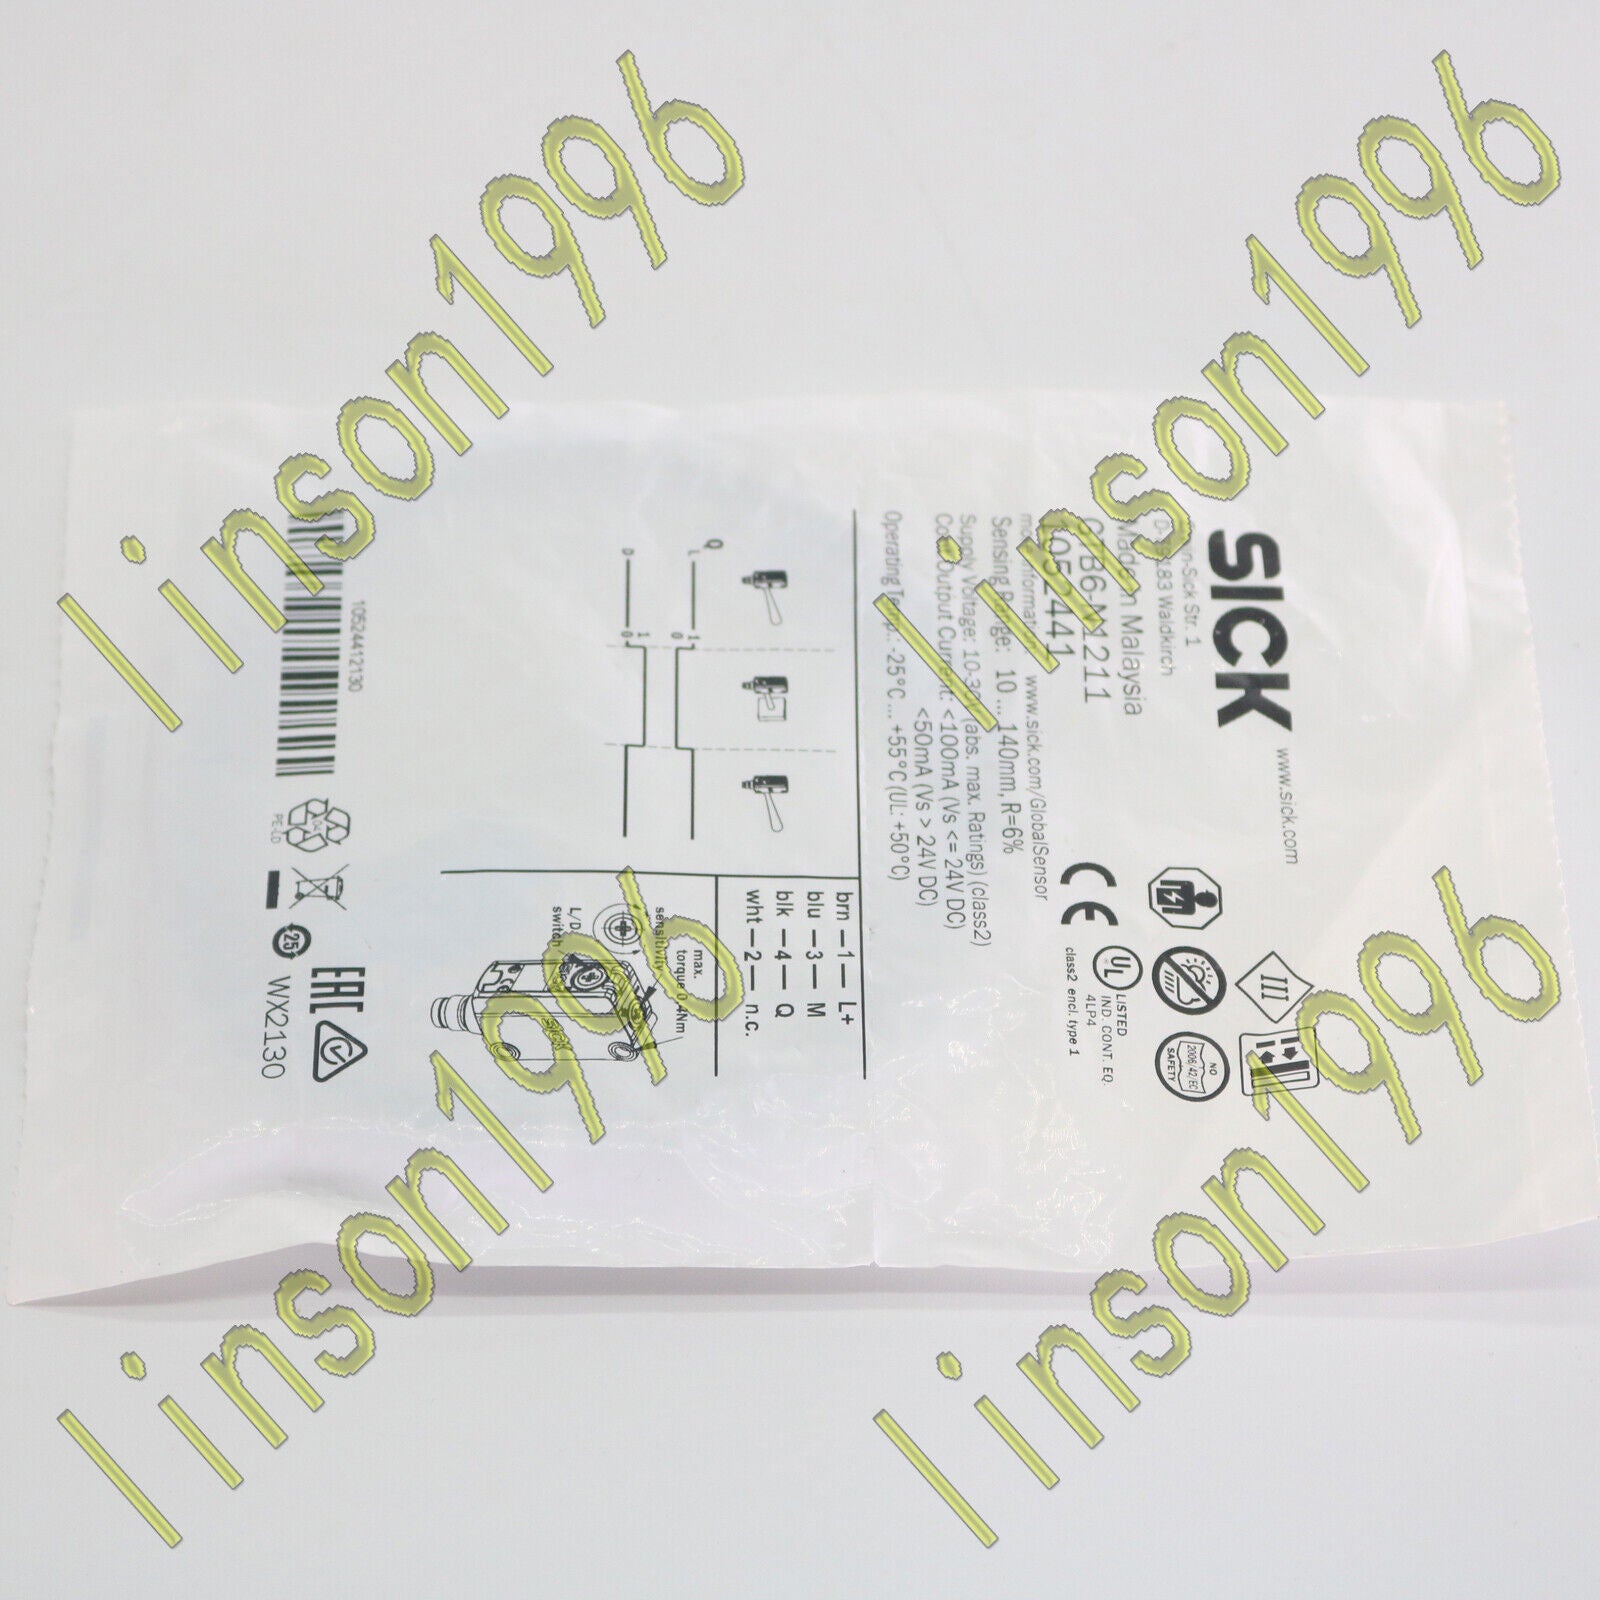 new  For SICK Photoelectric Switch GTB6-N1211 1052441 SPOT STOCK